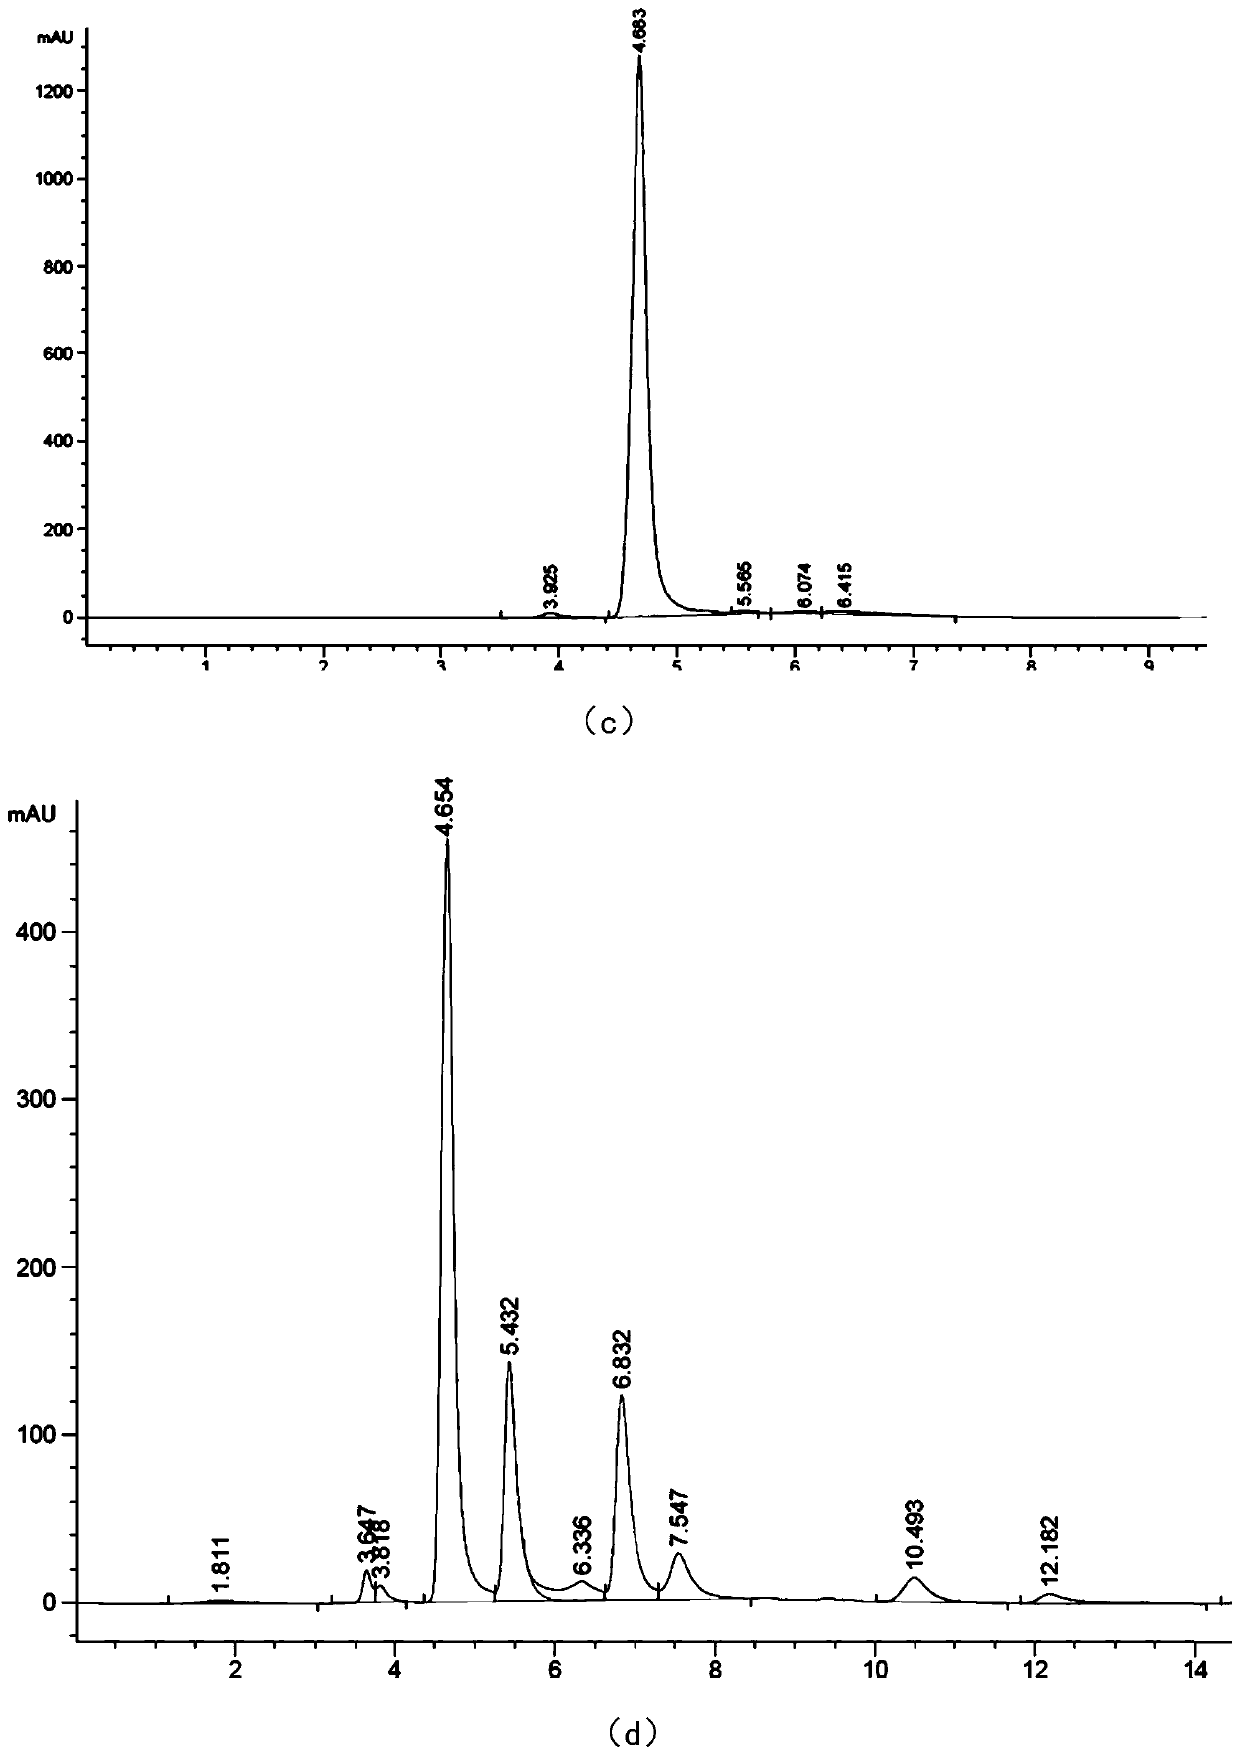 Recombinant escherichia coli for high yield of cytidine monophosphate and application of recombinant escherichia coli